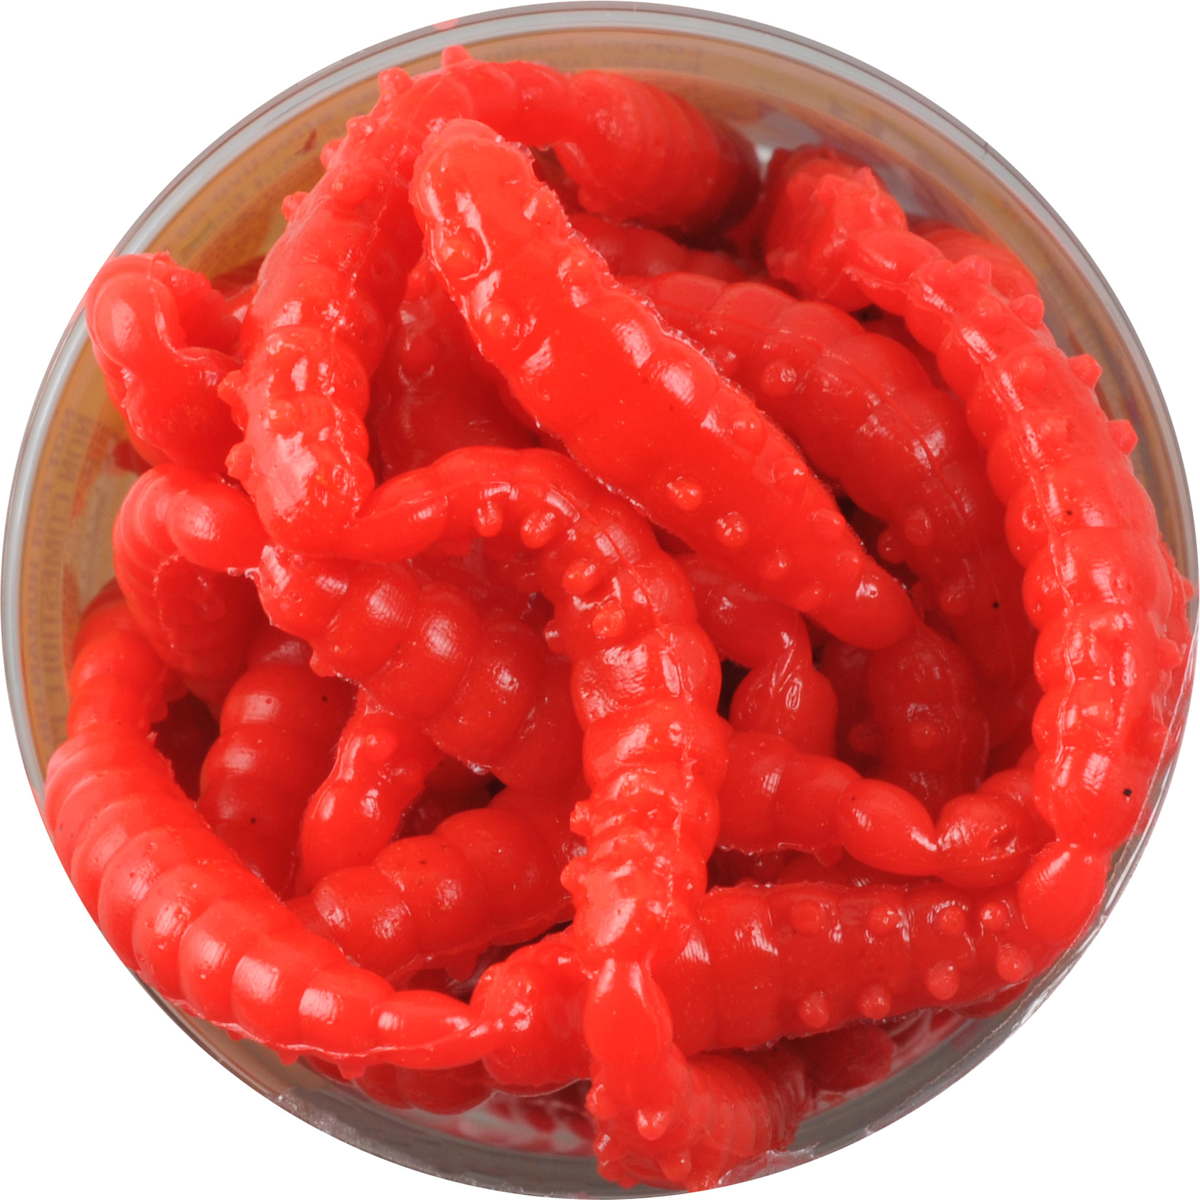 Photo of Berkley PowerBait Power Honey Worm for sale at United Tackle Shops.